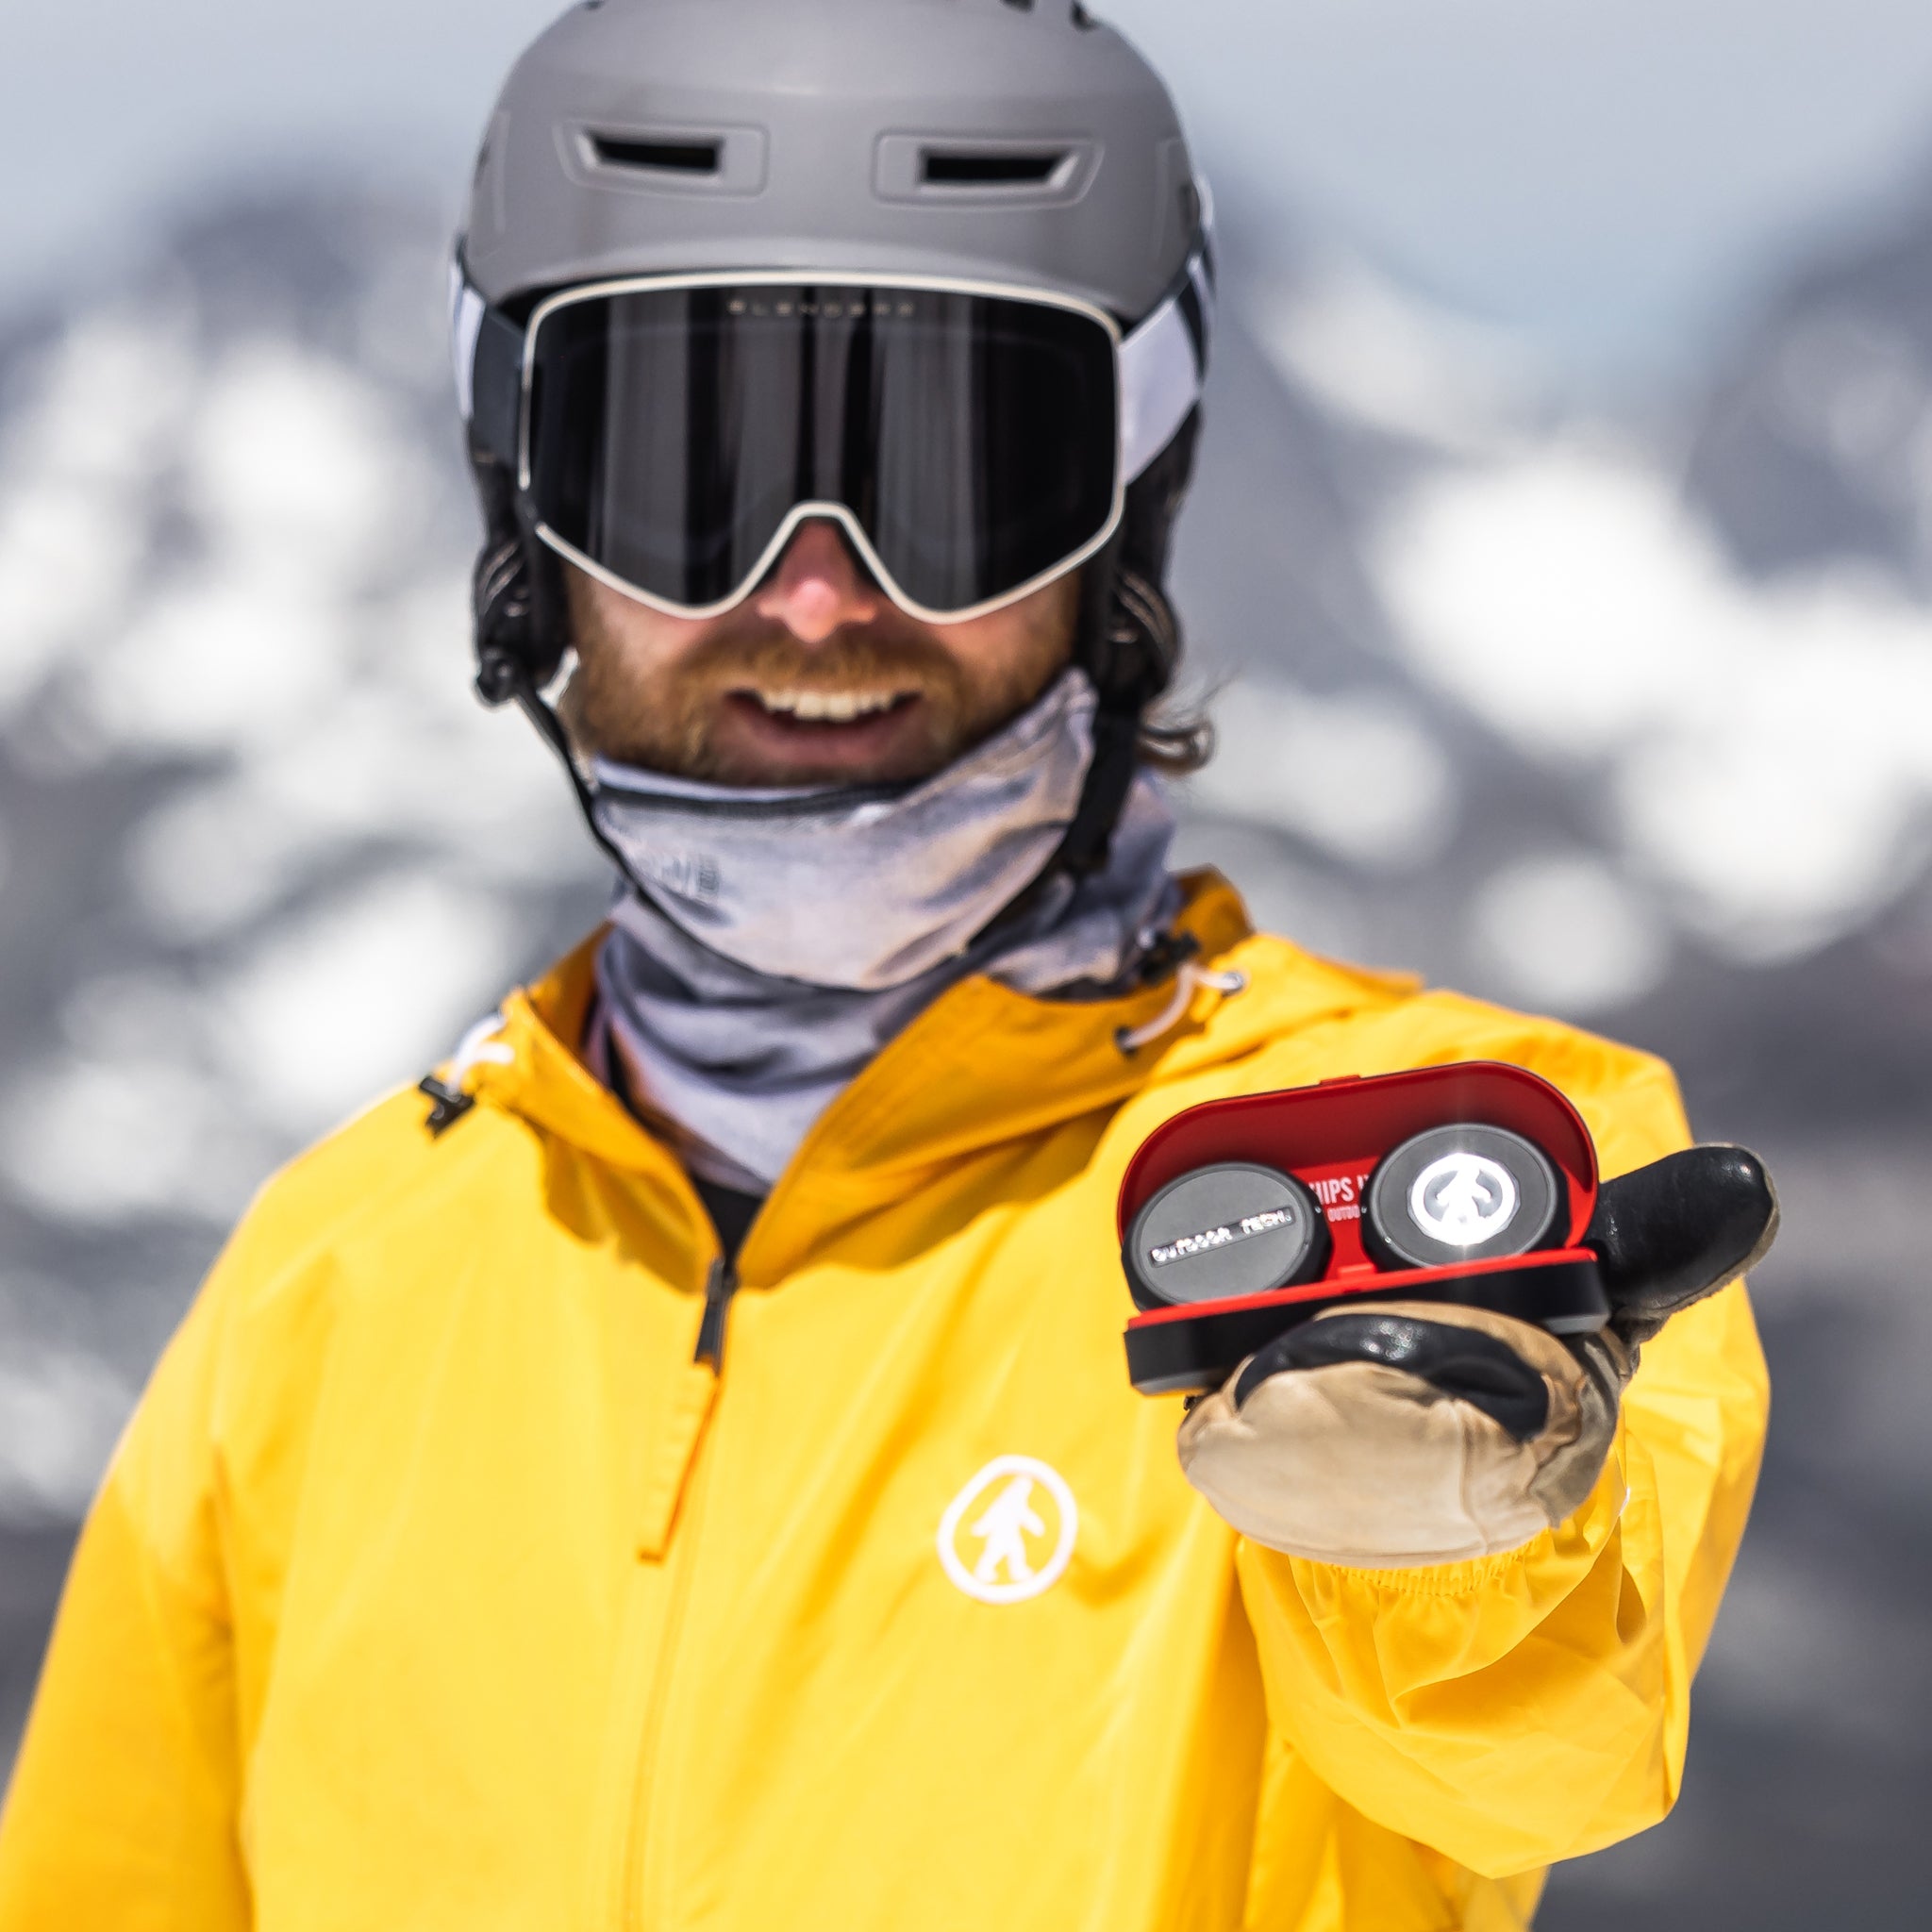 Chips Bluetooth Helmet Audio from Outdoor Tech Review